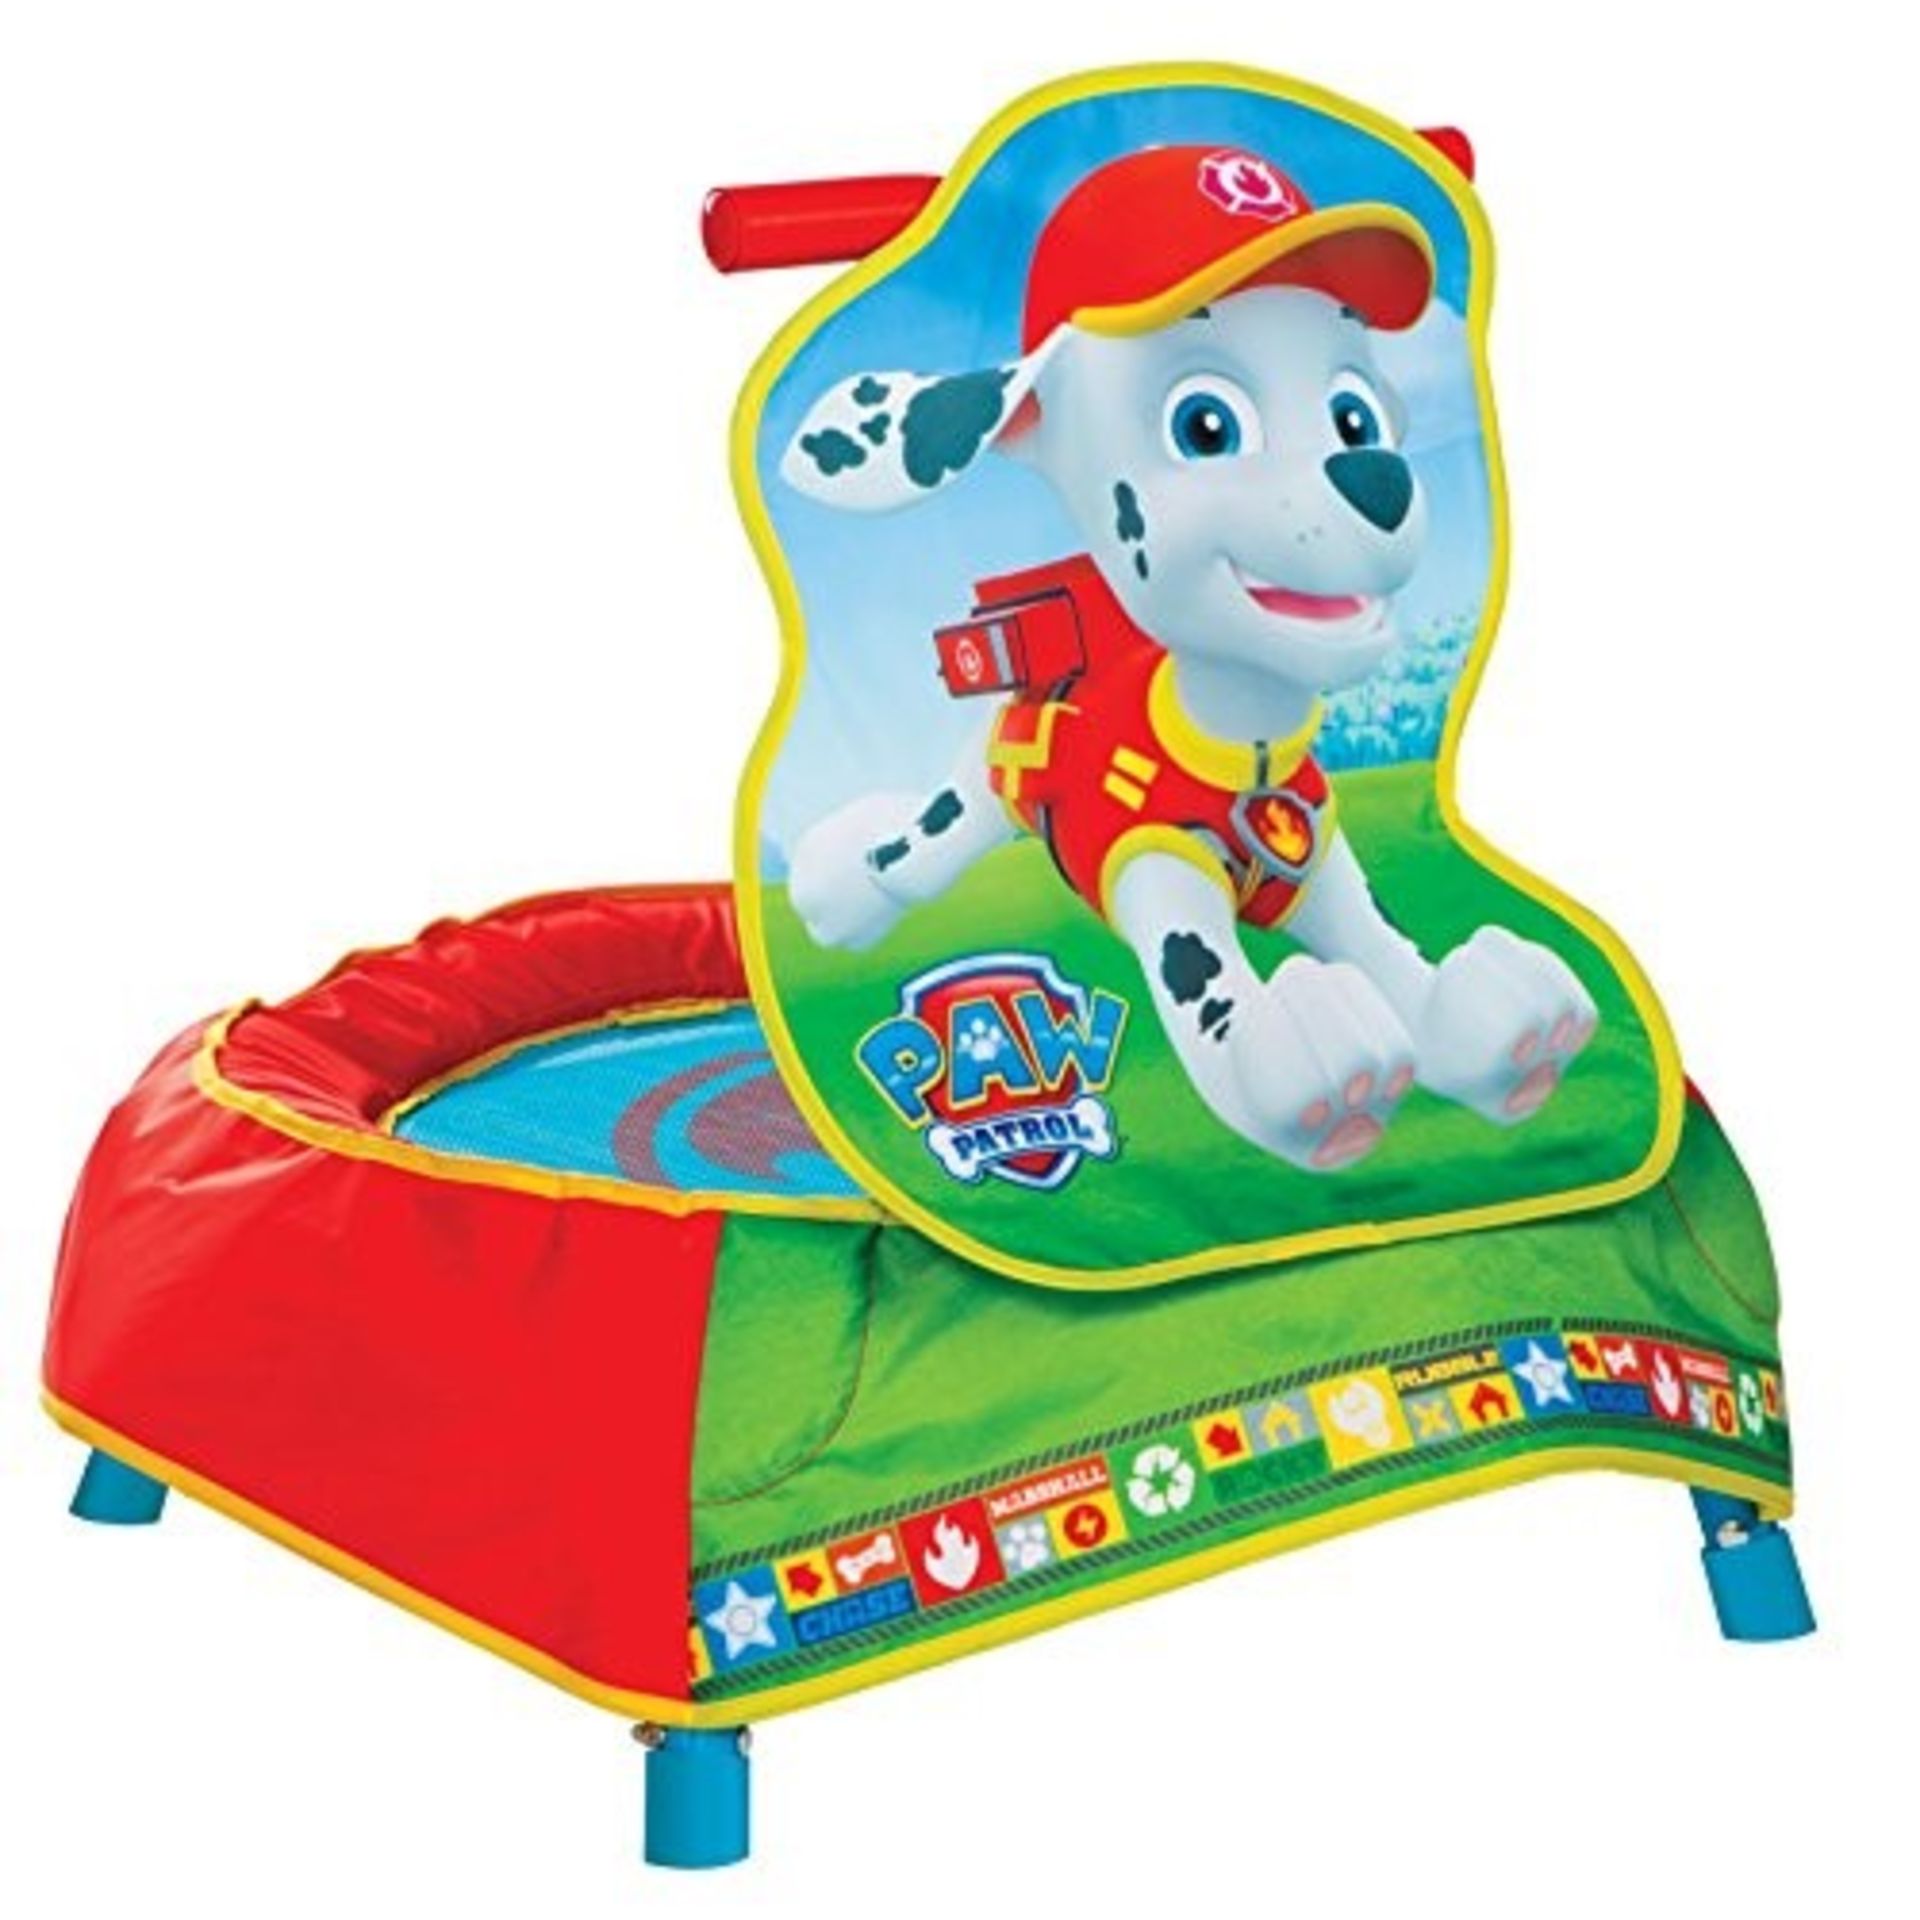 MISSING BOLTS AND DOG FRONT Kid Active Paw Patrol Paw PatrolMarshall Indoor Childrens